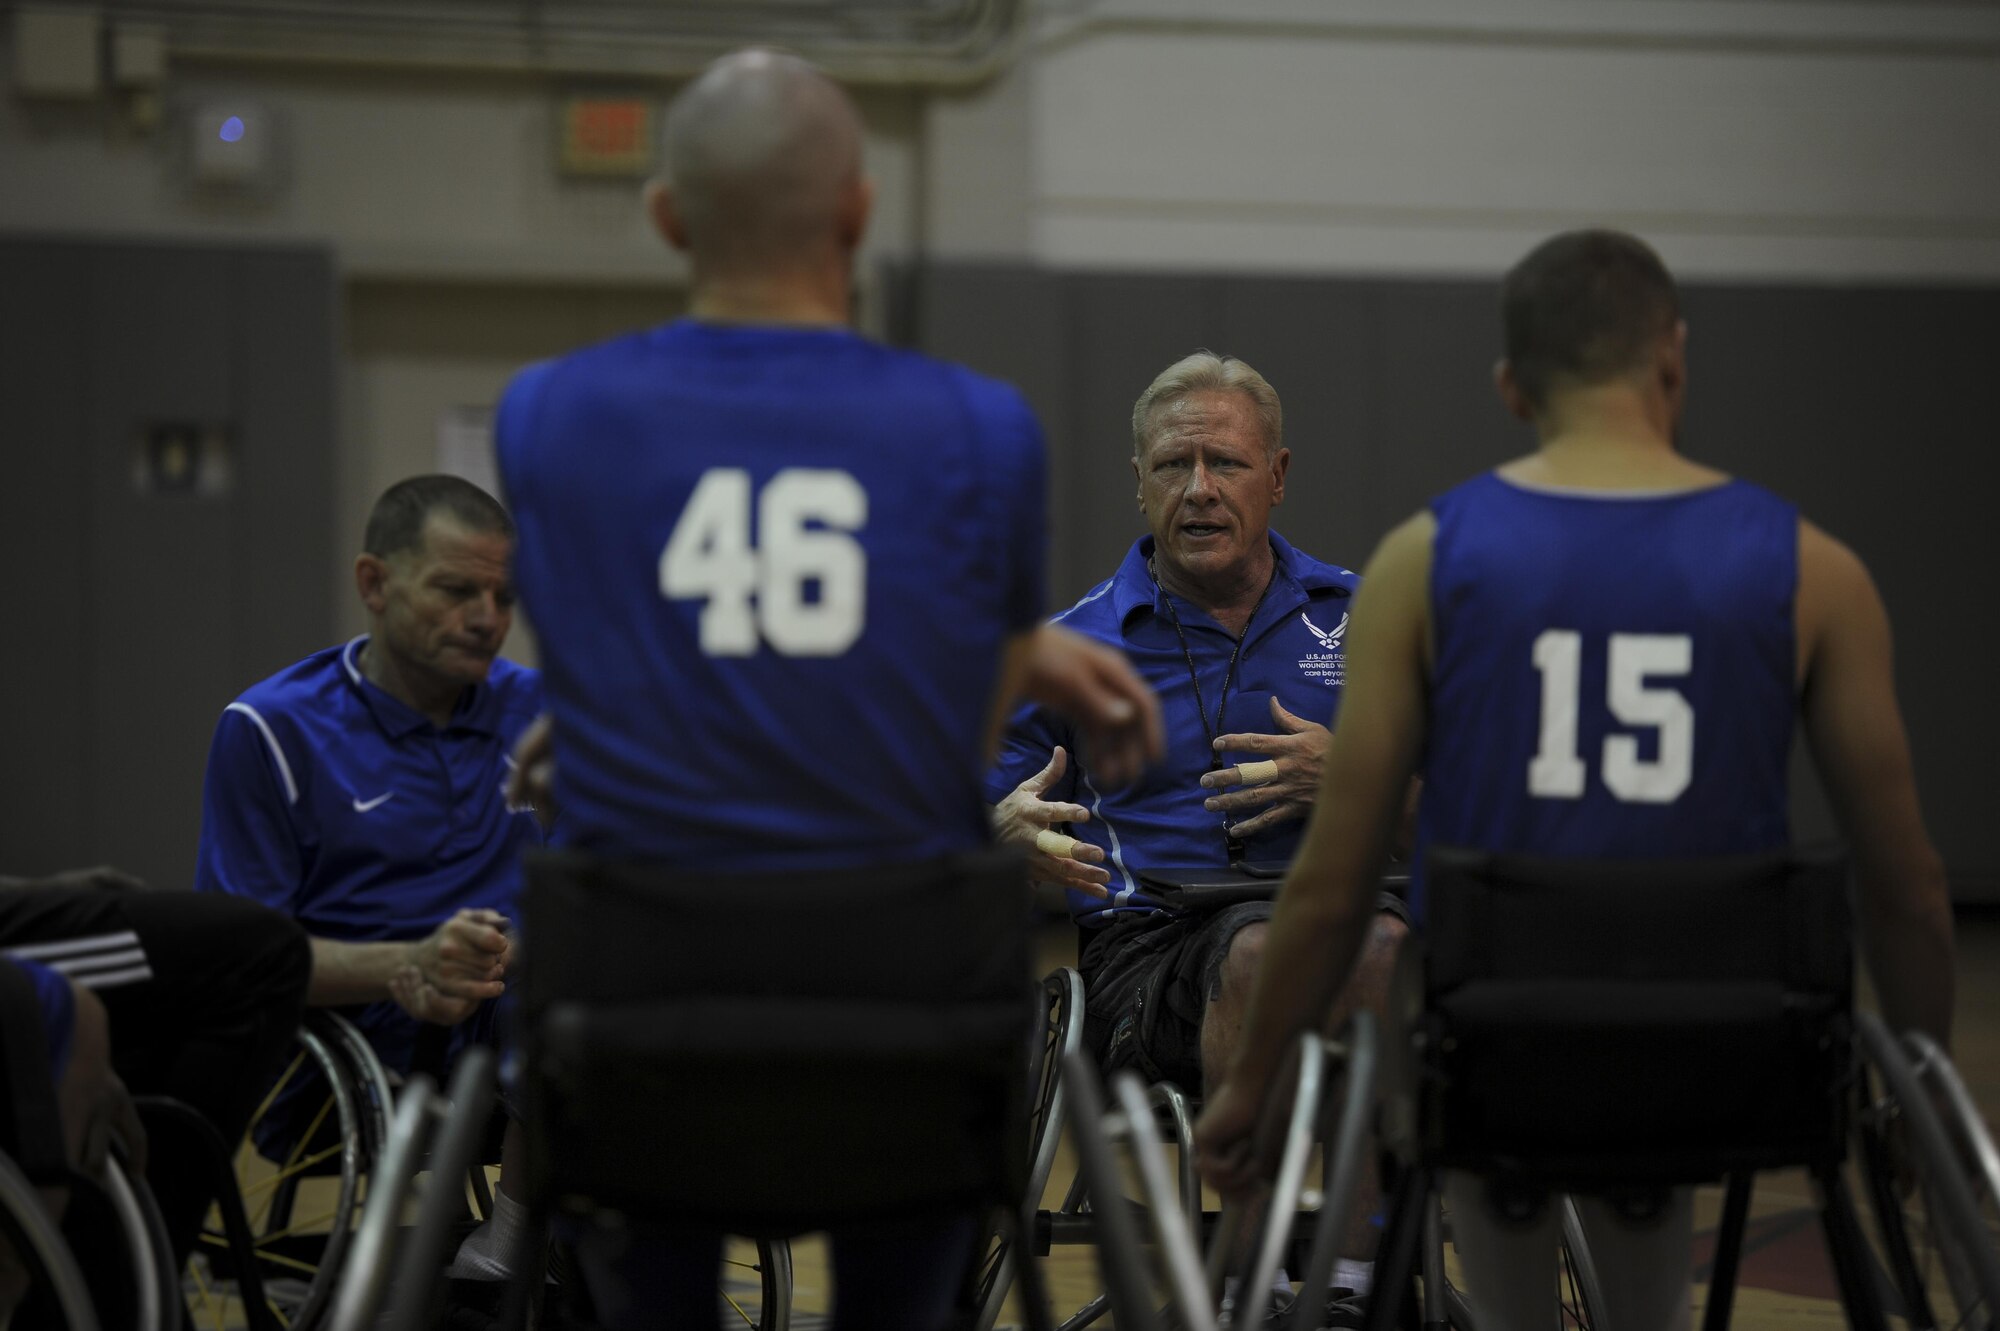 Mark Shepherd, the coach of the Air Force wheelchair basketball team, gives advice to his team during a practice at Hurlburt Field, Fla., April 24, 2017. Shepherd has been coaching for three years. The team is set to compete against other Department of Defense teams in June. (U.S. Air Force photo by Airman 1st Class Dennis Spain)